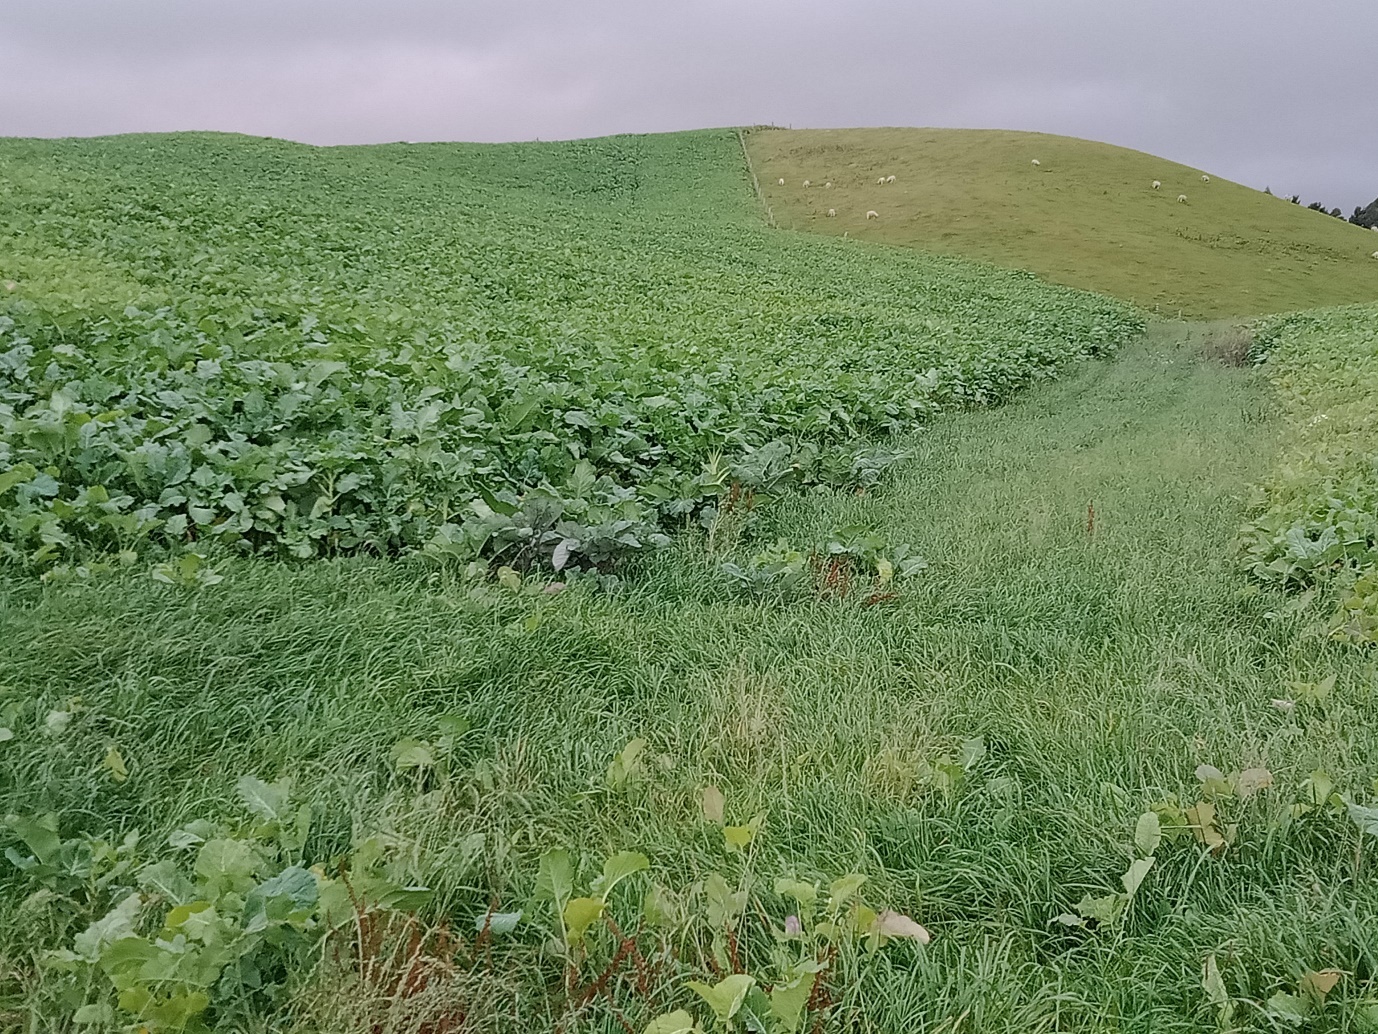 Leafy crop on a hill with a approx. 1 meter grass strip between two crop sections.